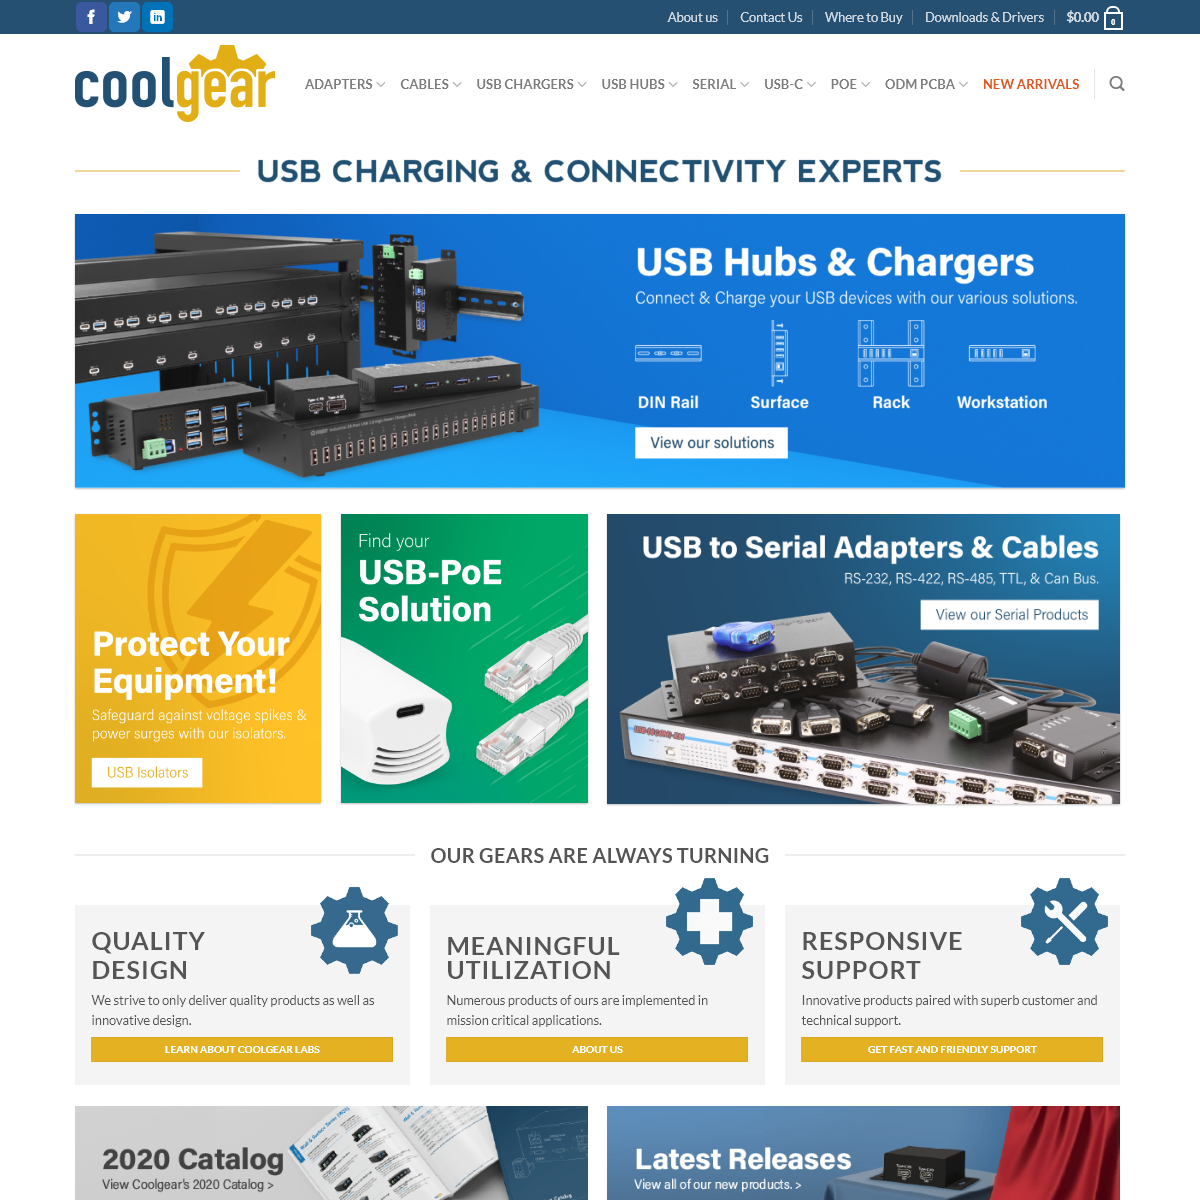 A complete backup of coolgear.com